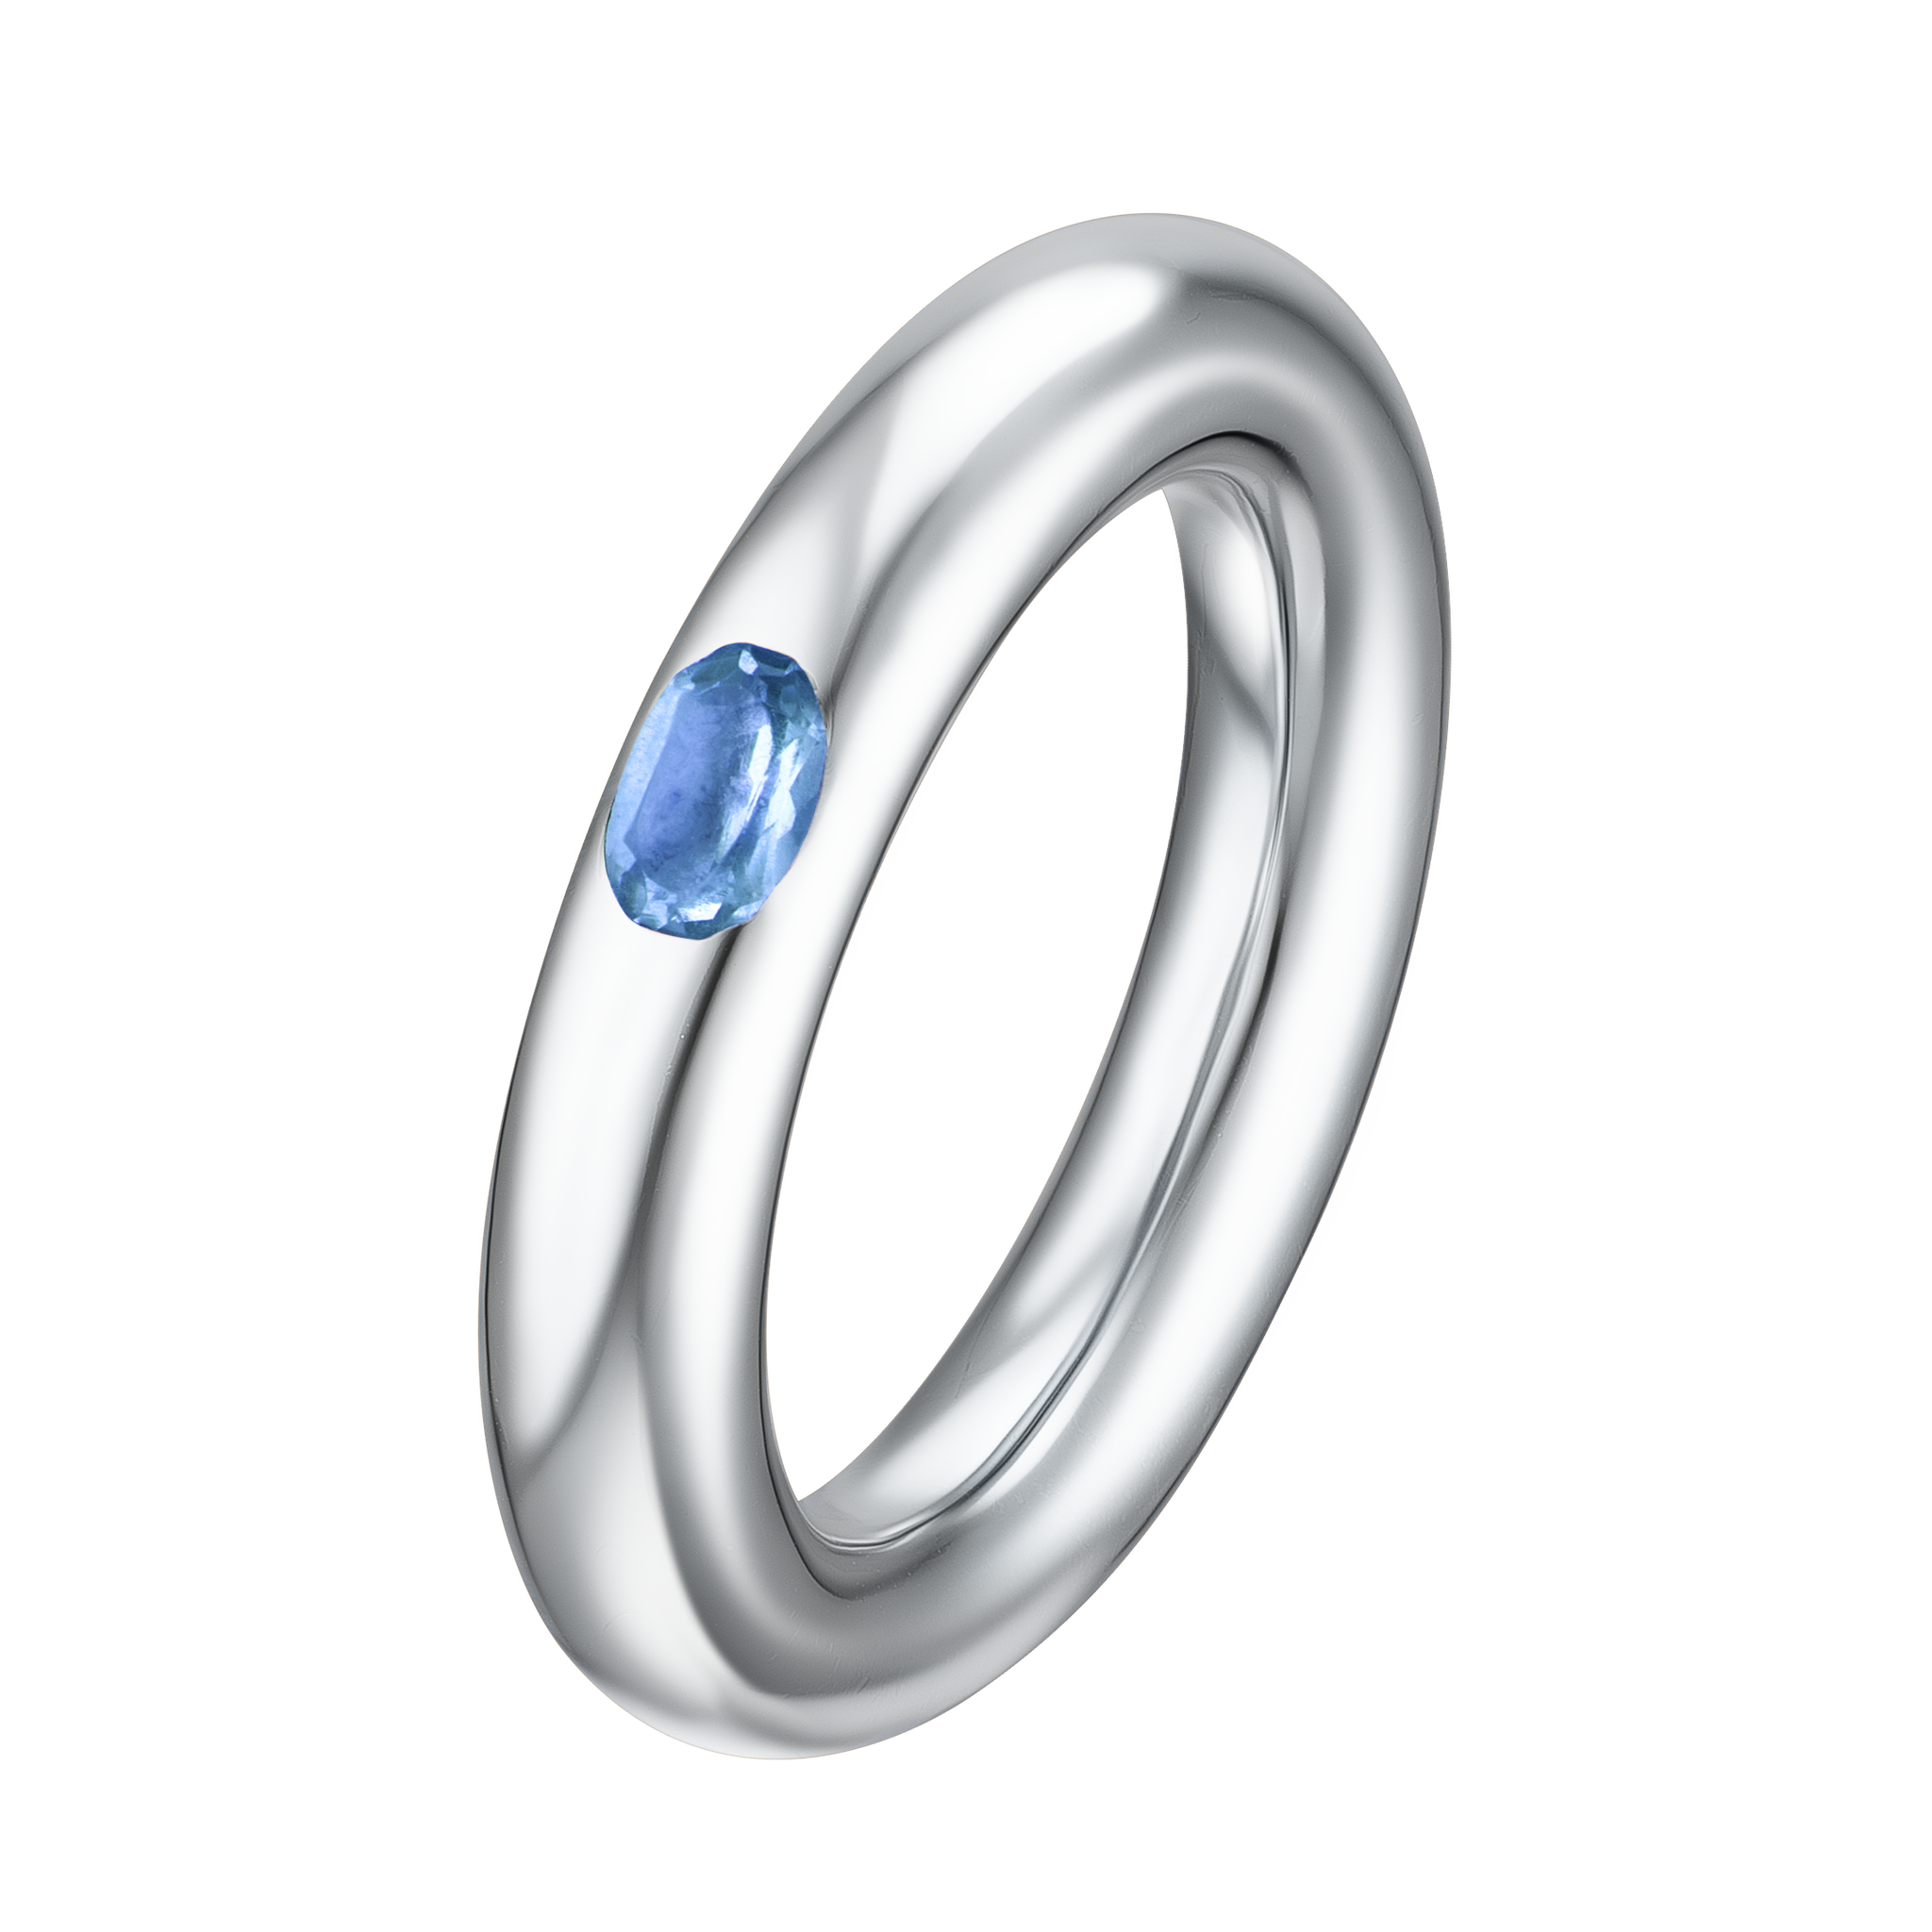 Puffy blue ring